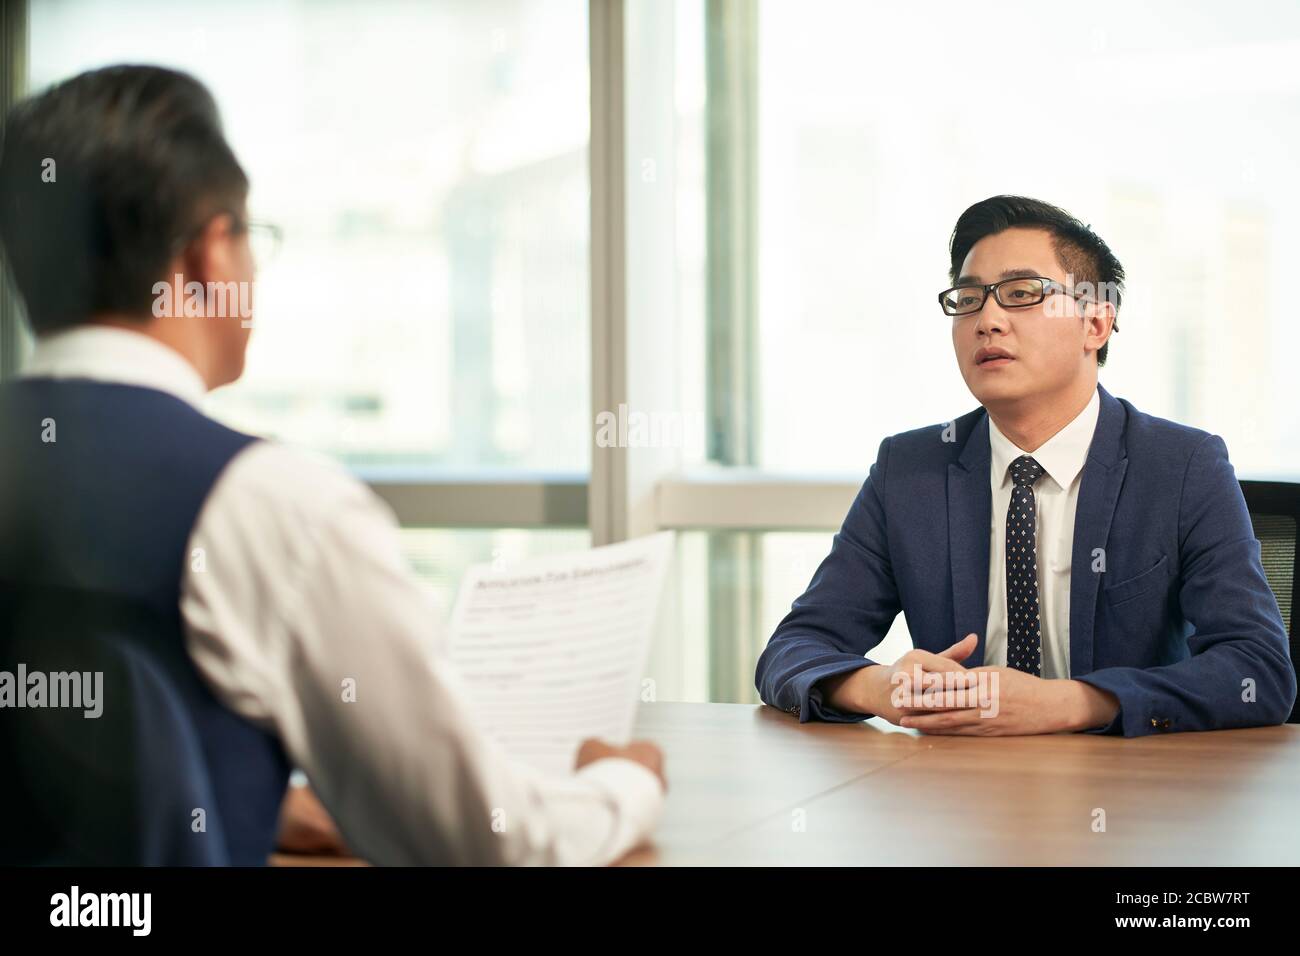 young asian man being interviewed by corporate human resources manager Stock Photo